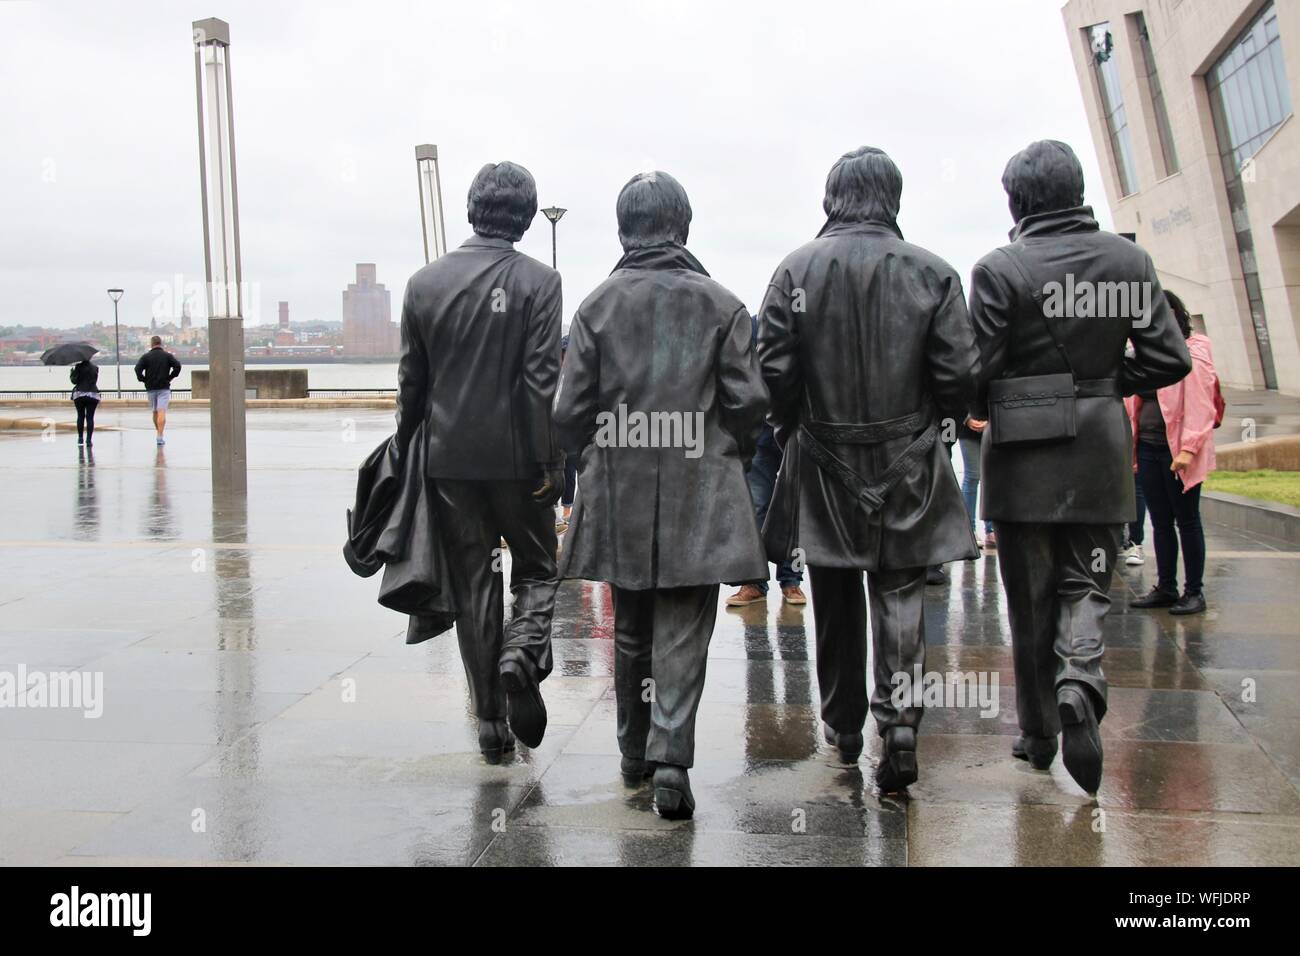 Sculpture of the Beatles on Pier Head, Merseyside, Liverpool, in rainy weather. Installed in 2015. Artist: Andy Edwards. Europe. Stock Photo